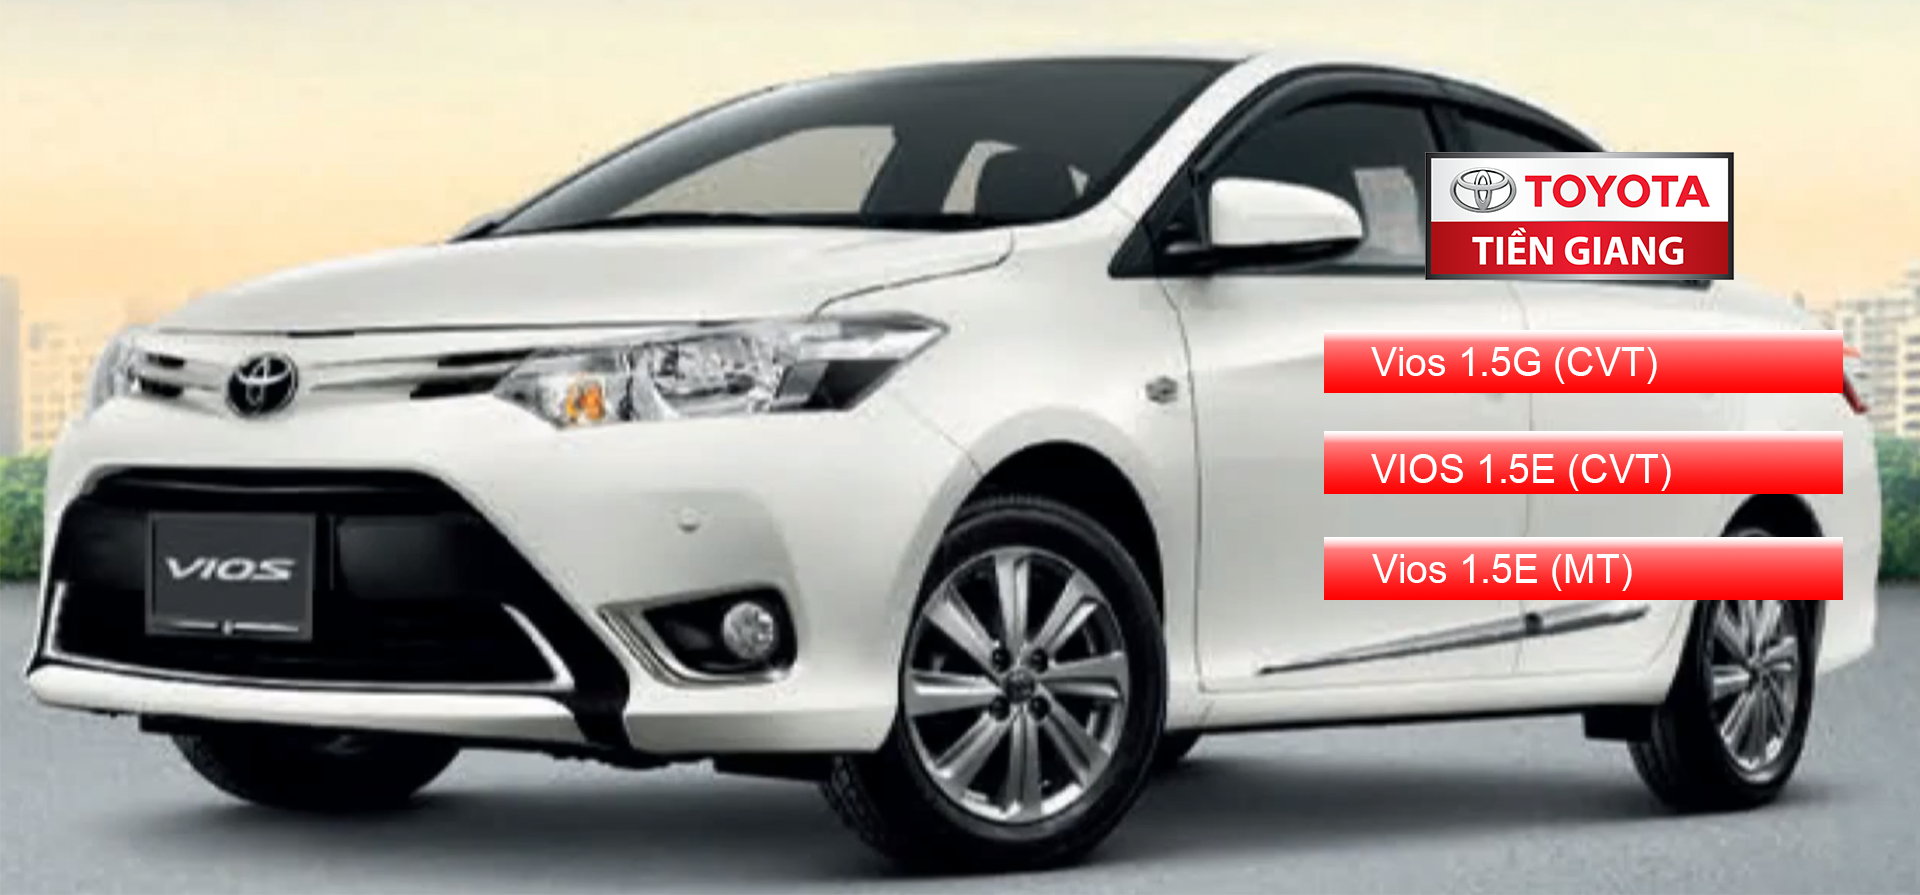 cac-dong-xe-toyota-vios